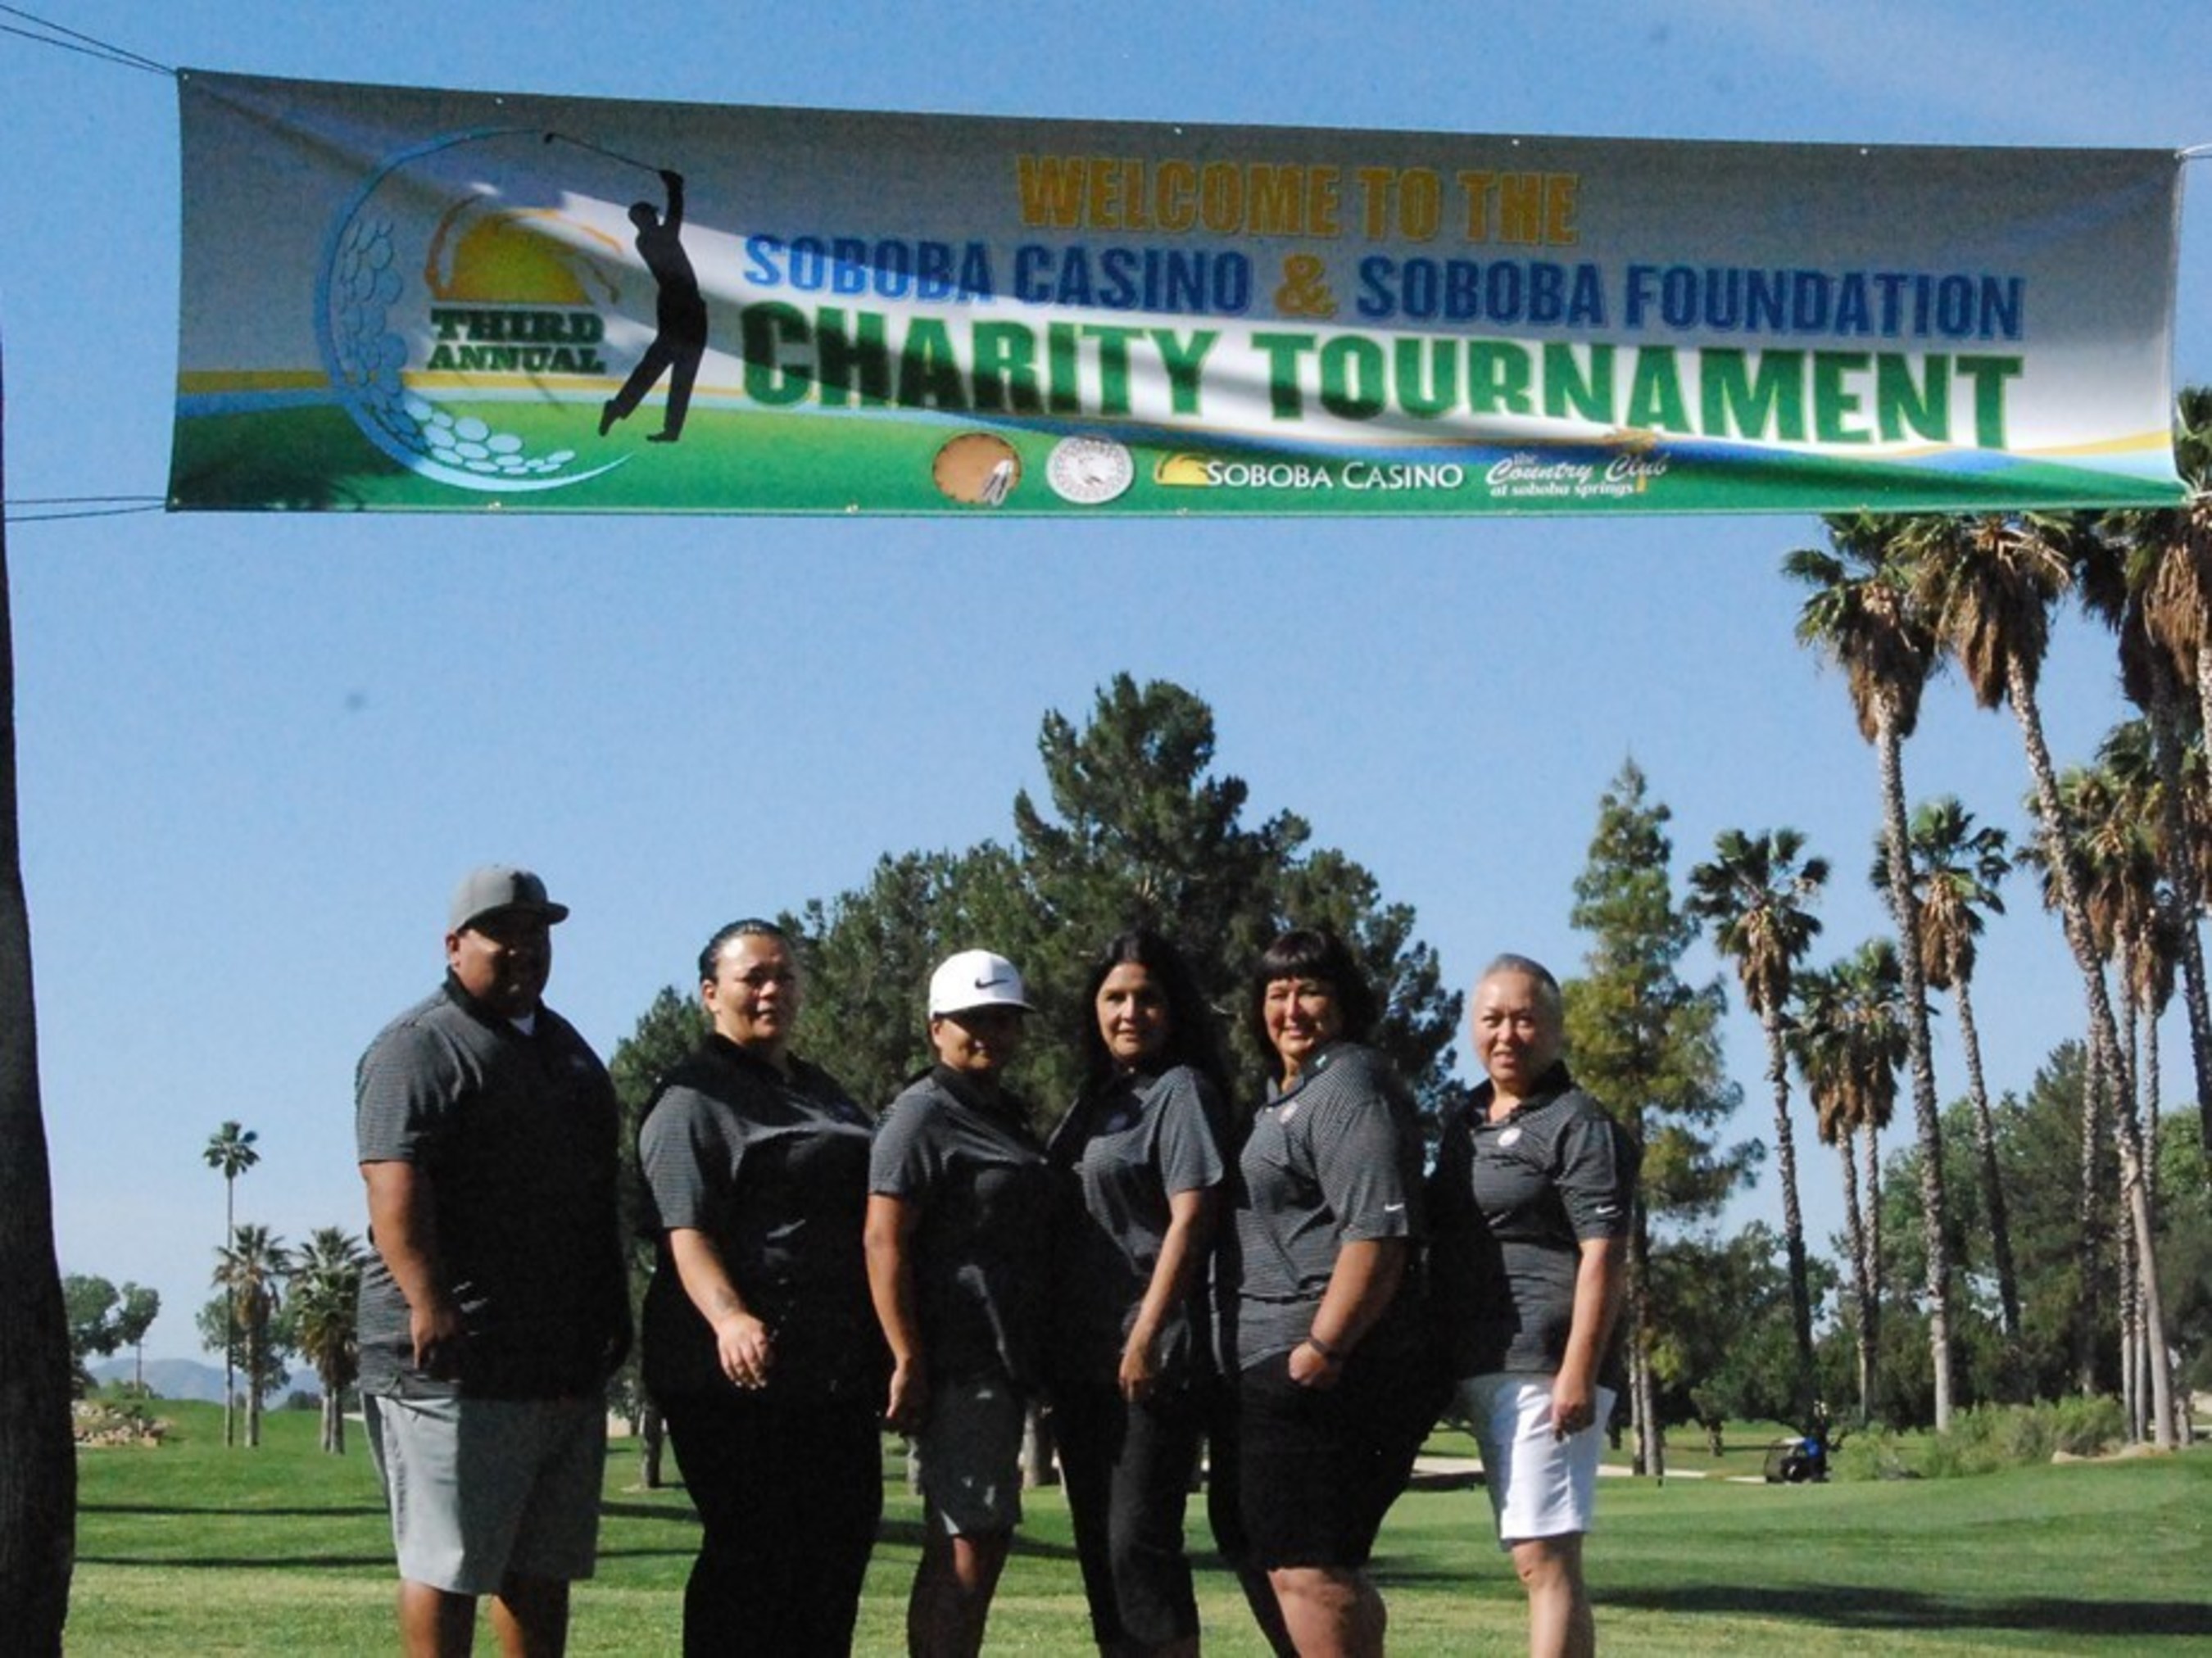 Members of the Soboba Foundation and Council at the 3rd Annual Charity Golf Tournament